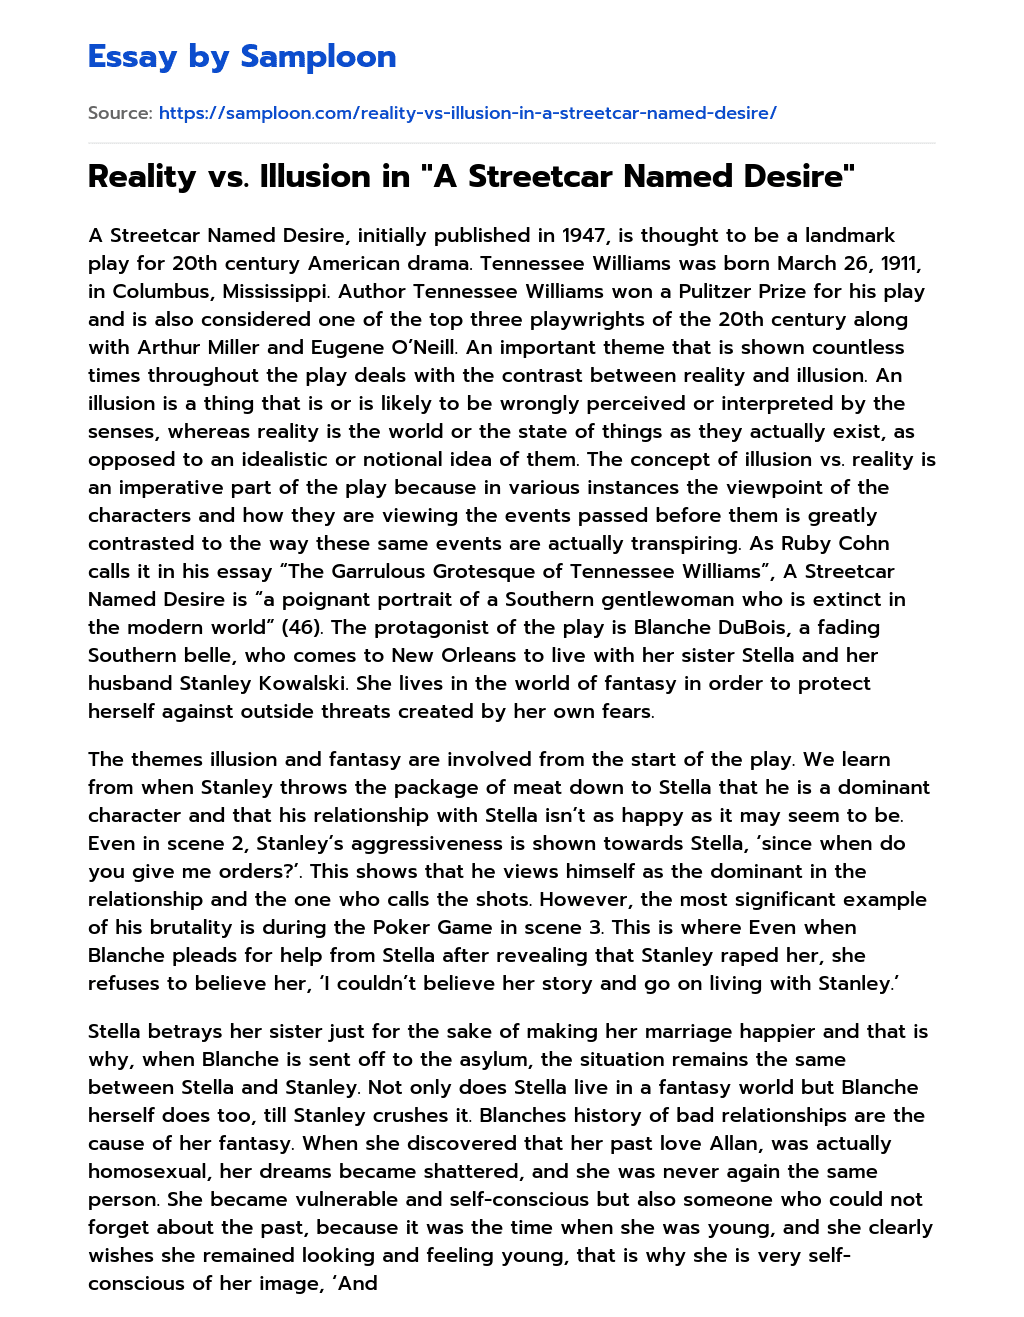 Reality vs. Illusion in “A Streetcar Named Desire” essay